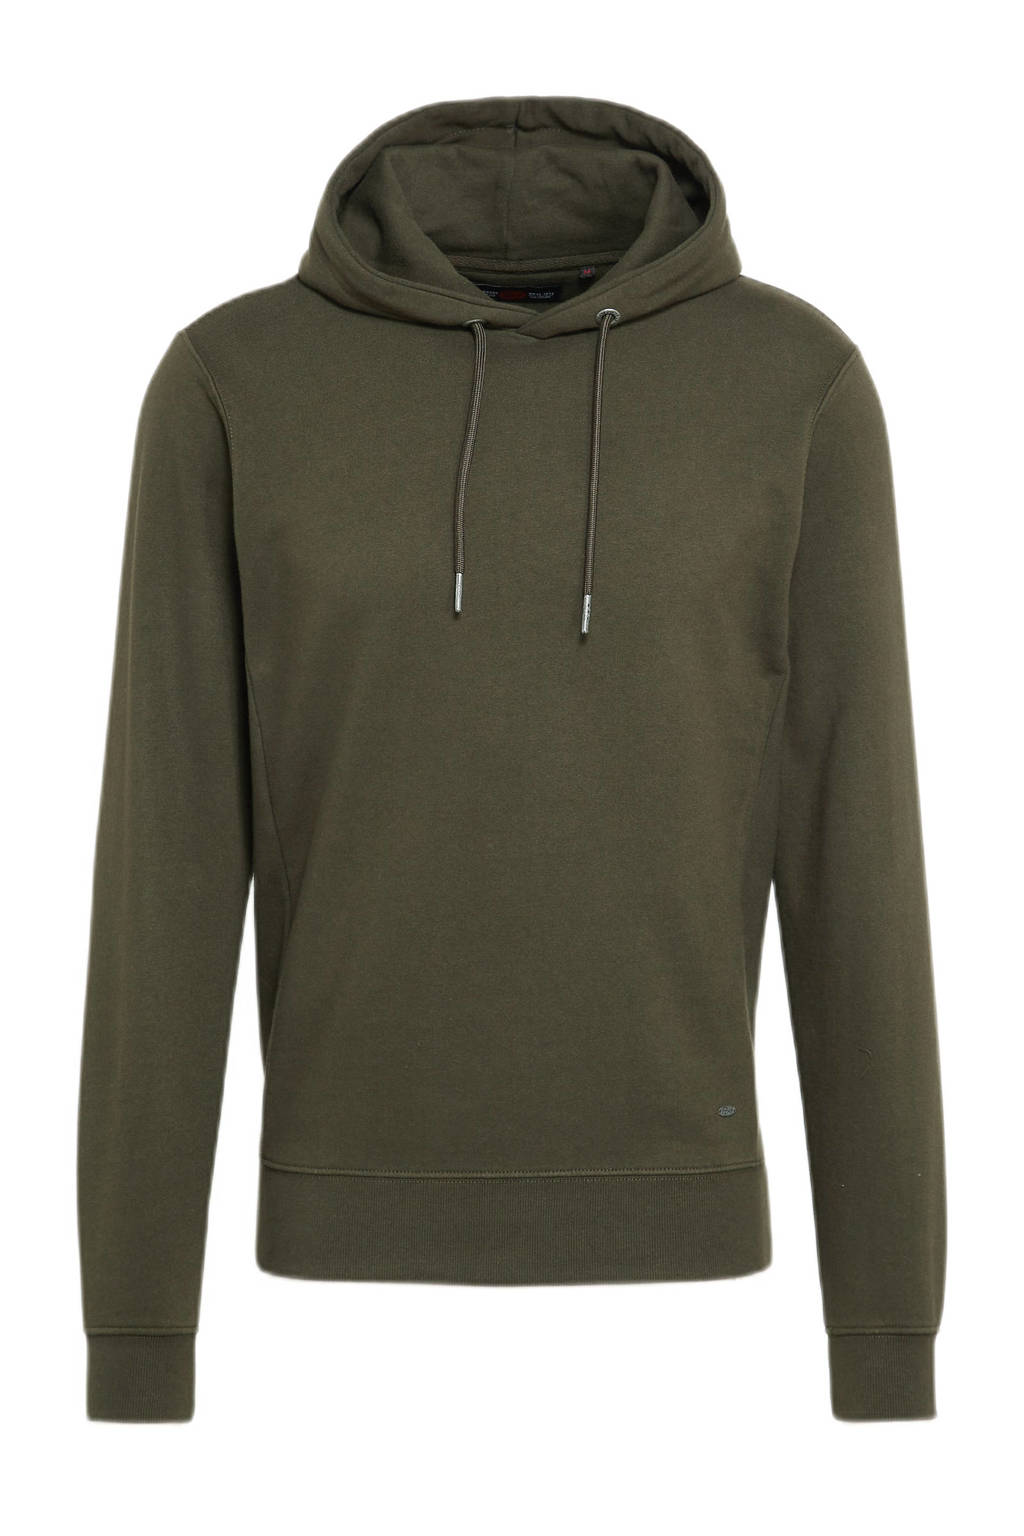 Petrol Industries hoodie forest, Forest